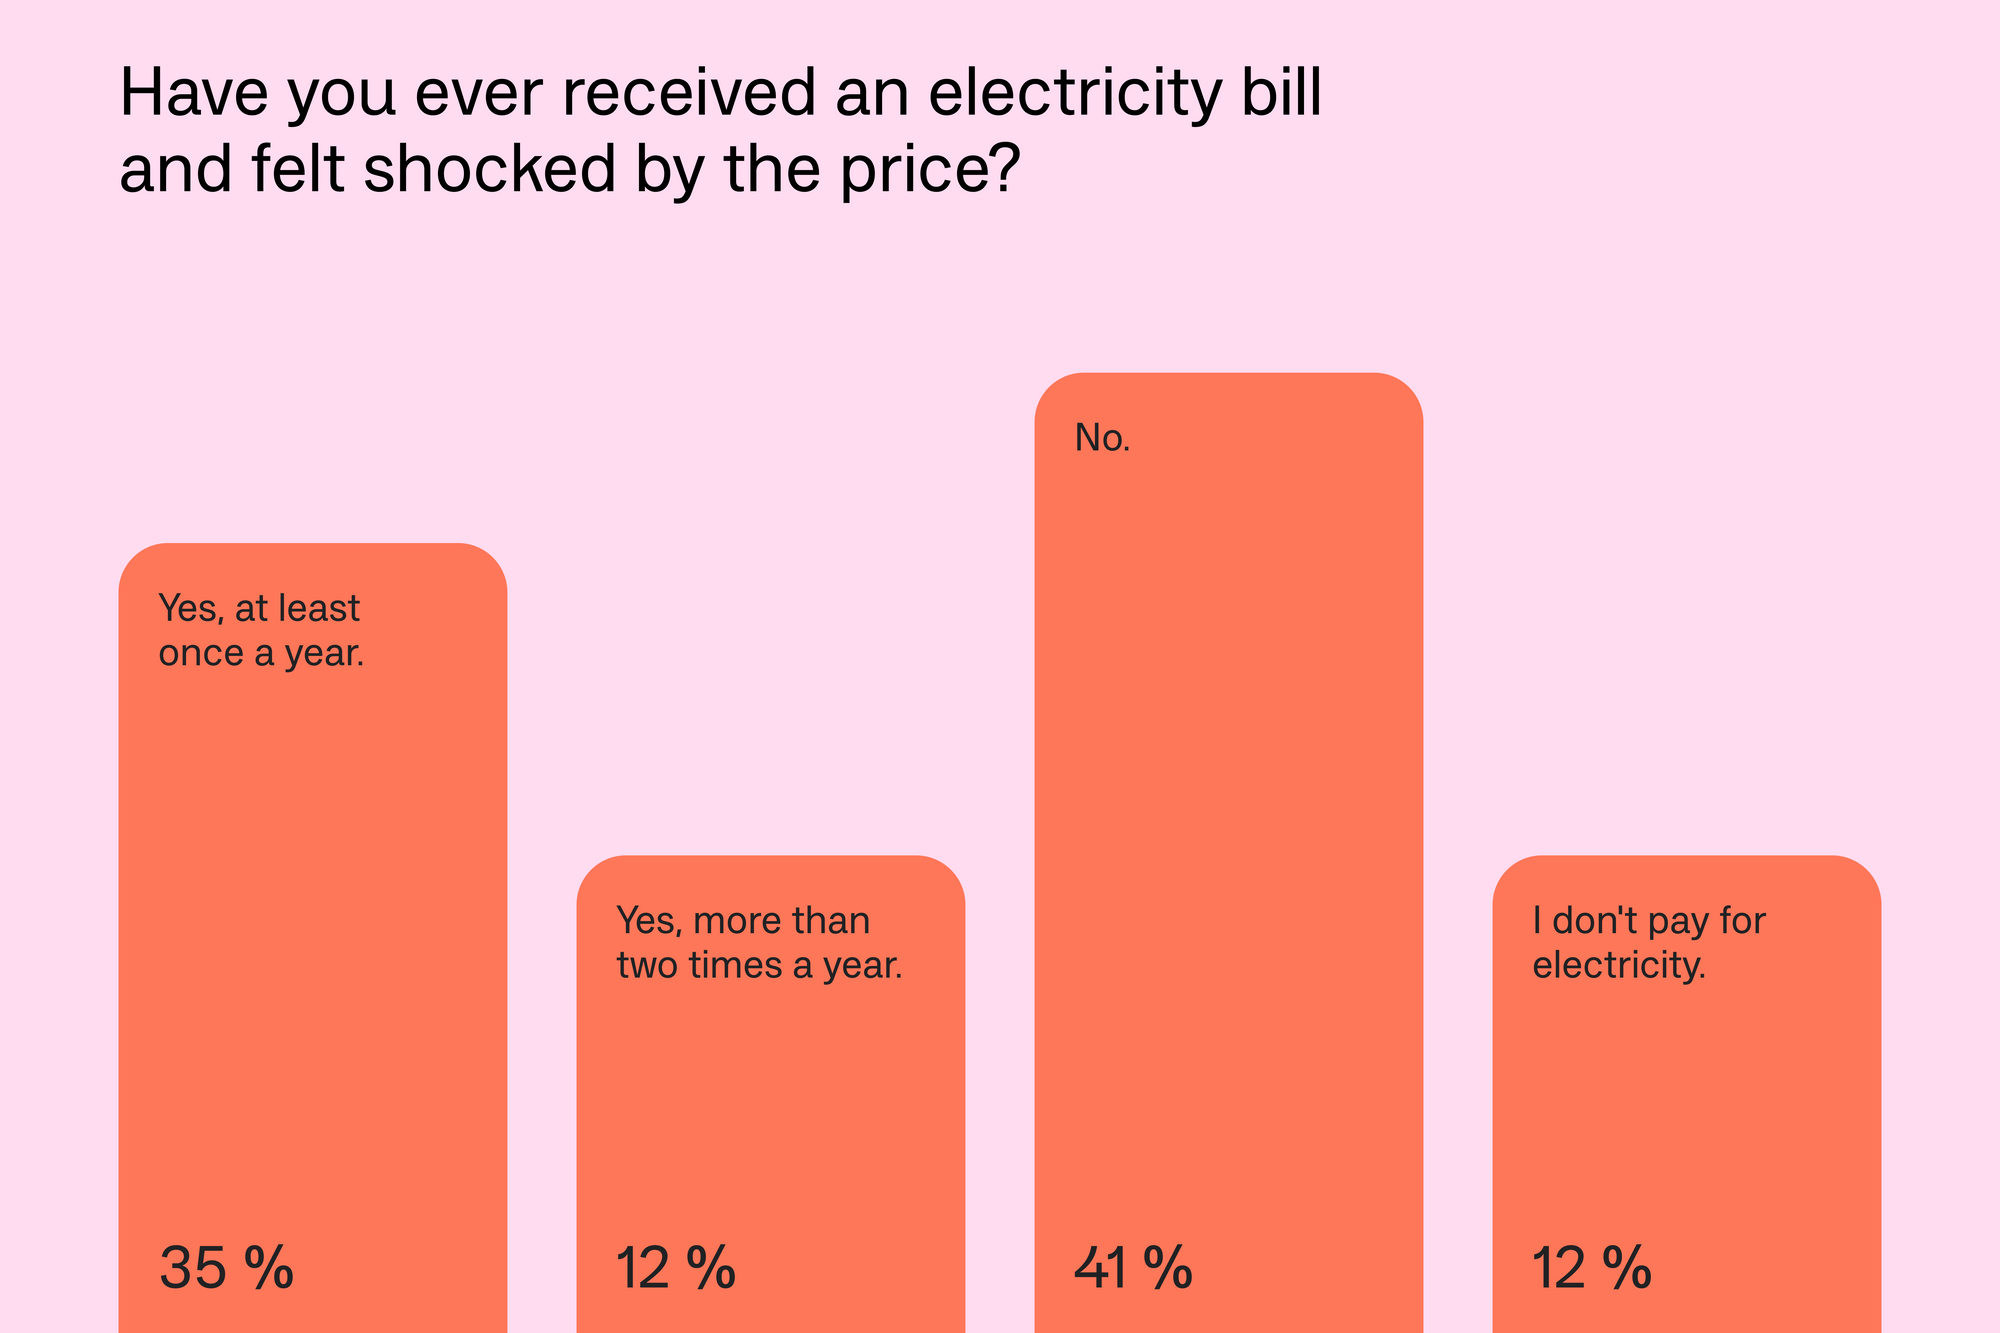 ANYFIN_SWE_ELECTRICITY_BILLS_GRAPH_02_3-2_1620X1080.png